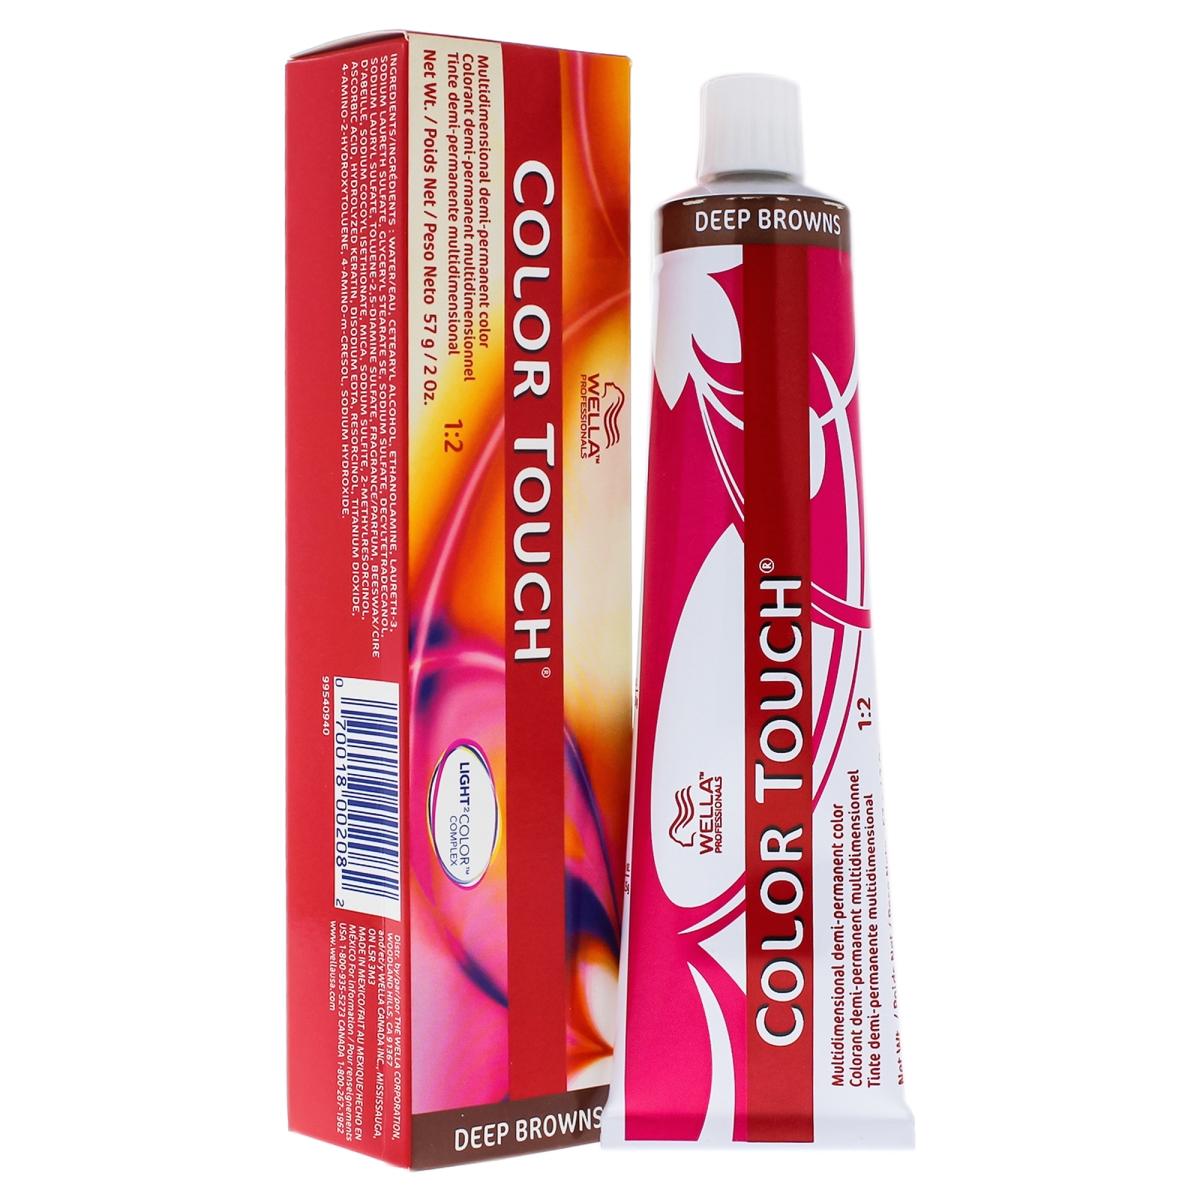 I0086484 Color Touch Demi & Permanent Hair Color For Unisex - 7 75 Medium Blonde & Brown Red & Violet - 2 Oz